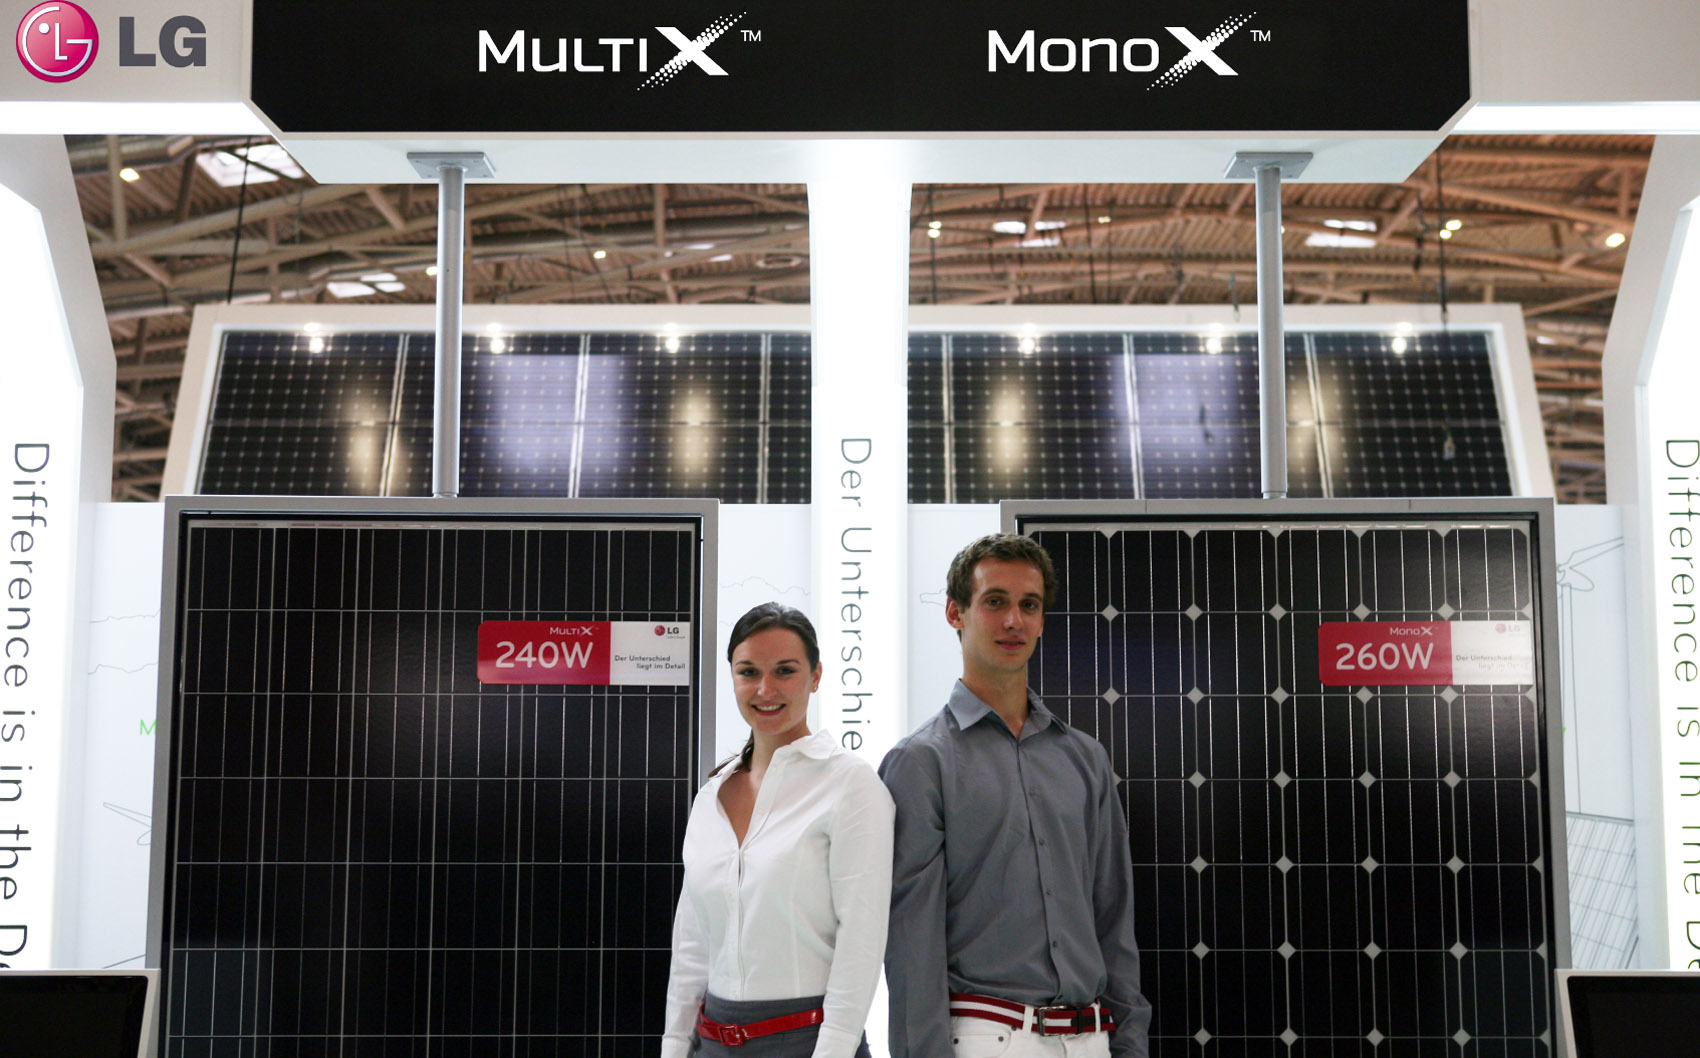 A center view of the Multi X and Mono with models in front